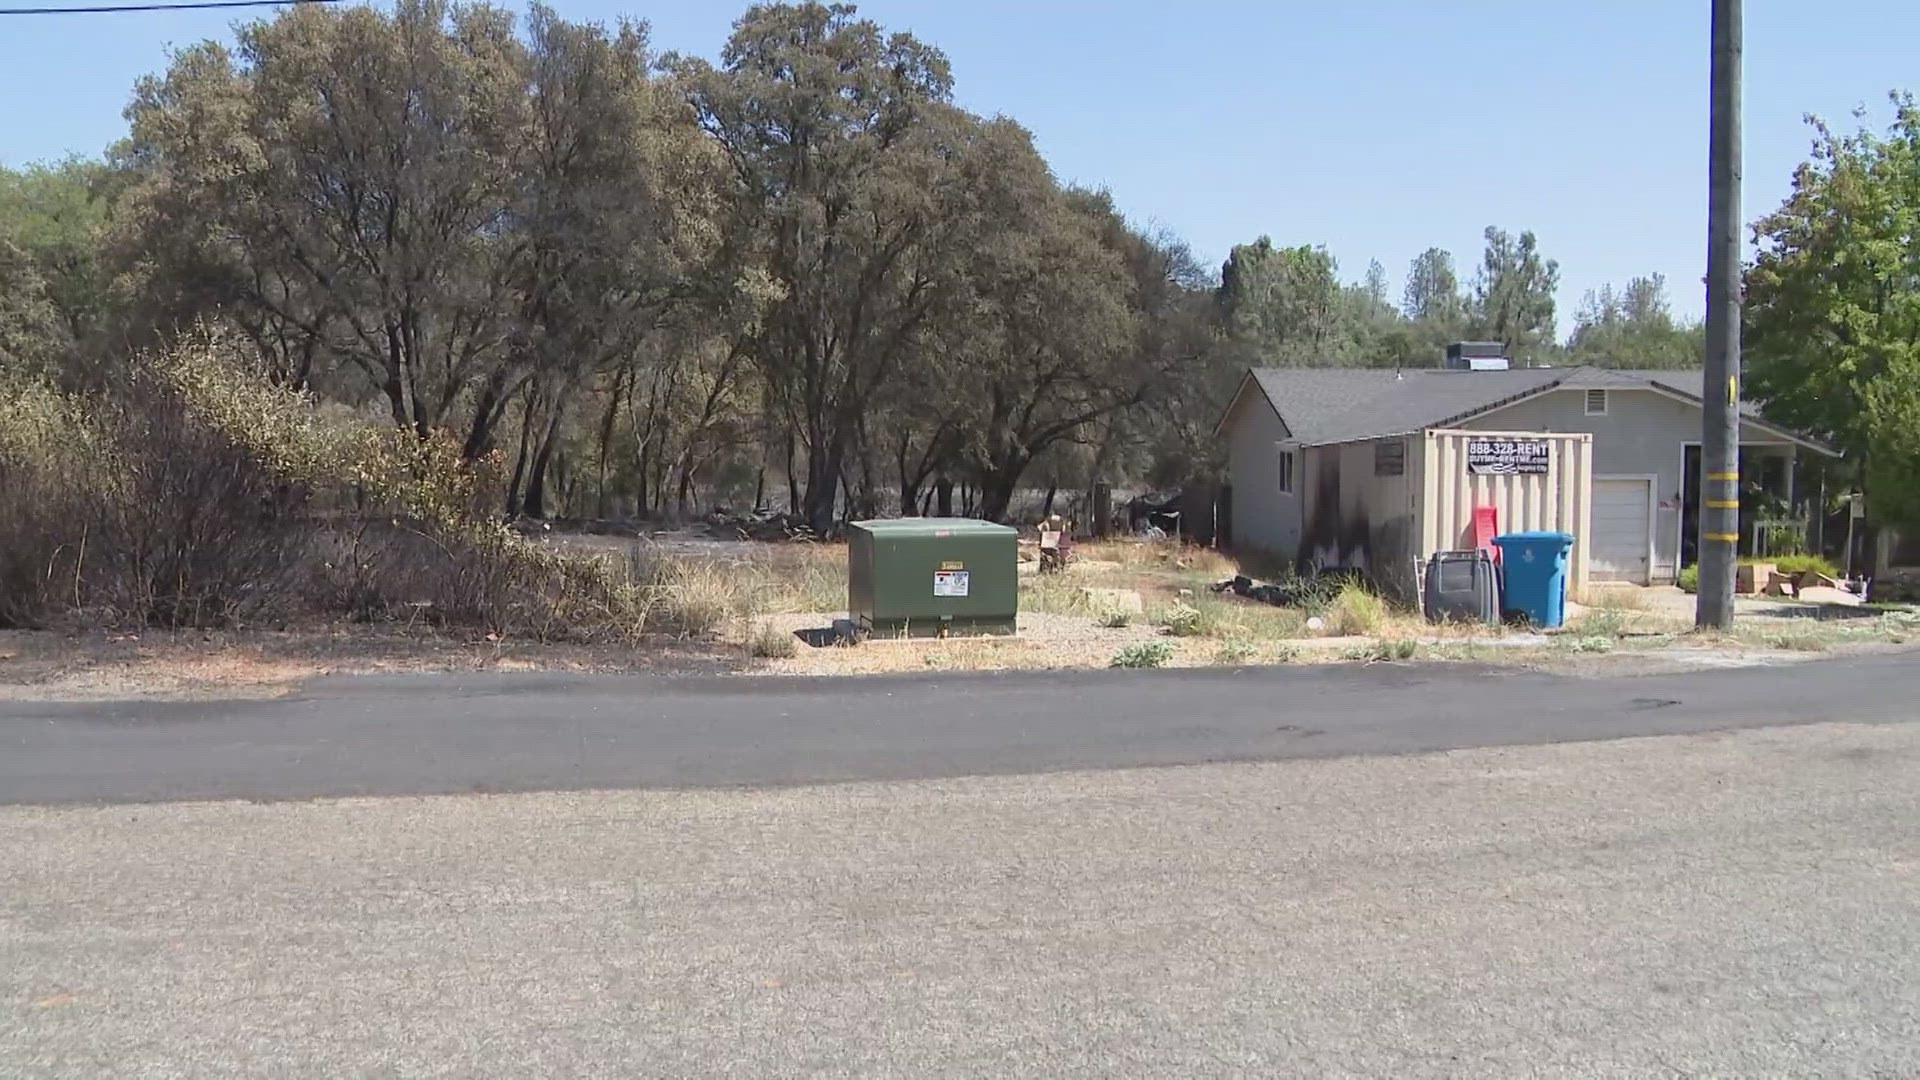 The Thompson Fire continues to burn in Butte County and has forced thousands of people to evacuate their homes.